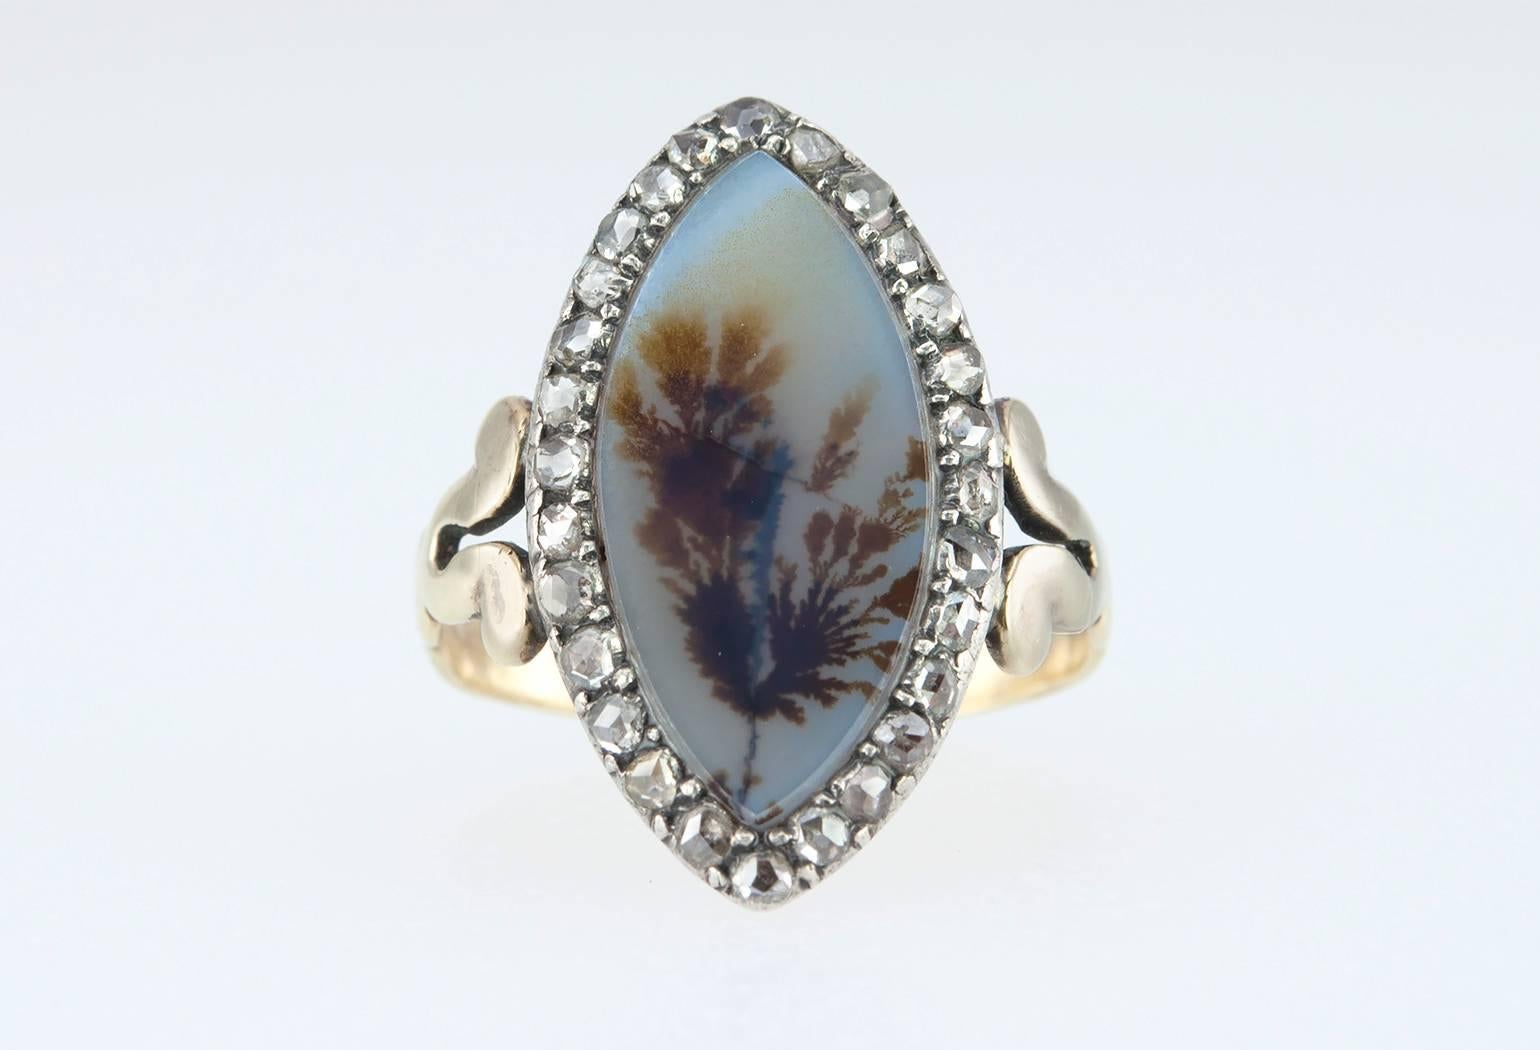 A beautiful and rare antique Georgian ring from circa 1780s. The navette shaped ring features a piece moss agate with 28 rose cut diamonds surrounding the 14 karat yellow gold and silver topped ring.  A lovely floral abstract pattern is engraved on